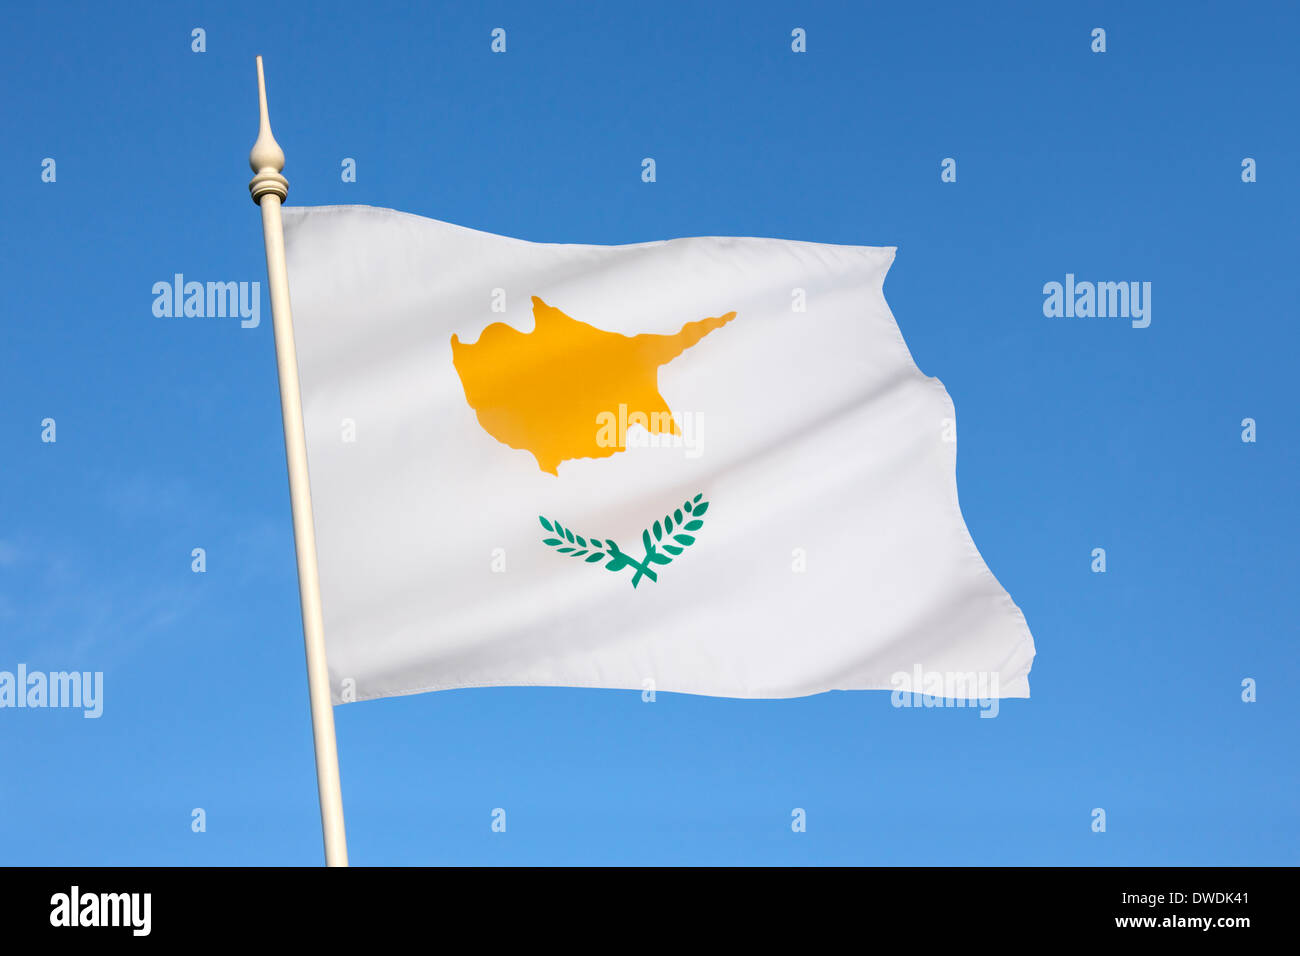 The national flag of Cyprus Stock Photo